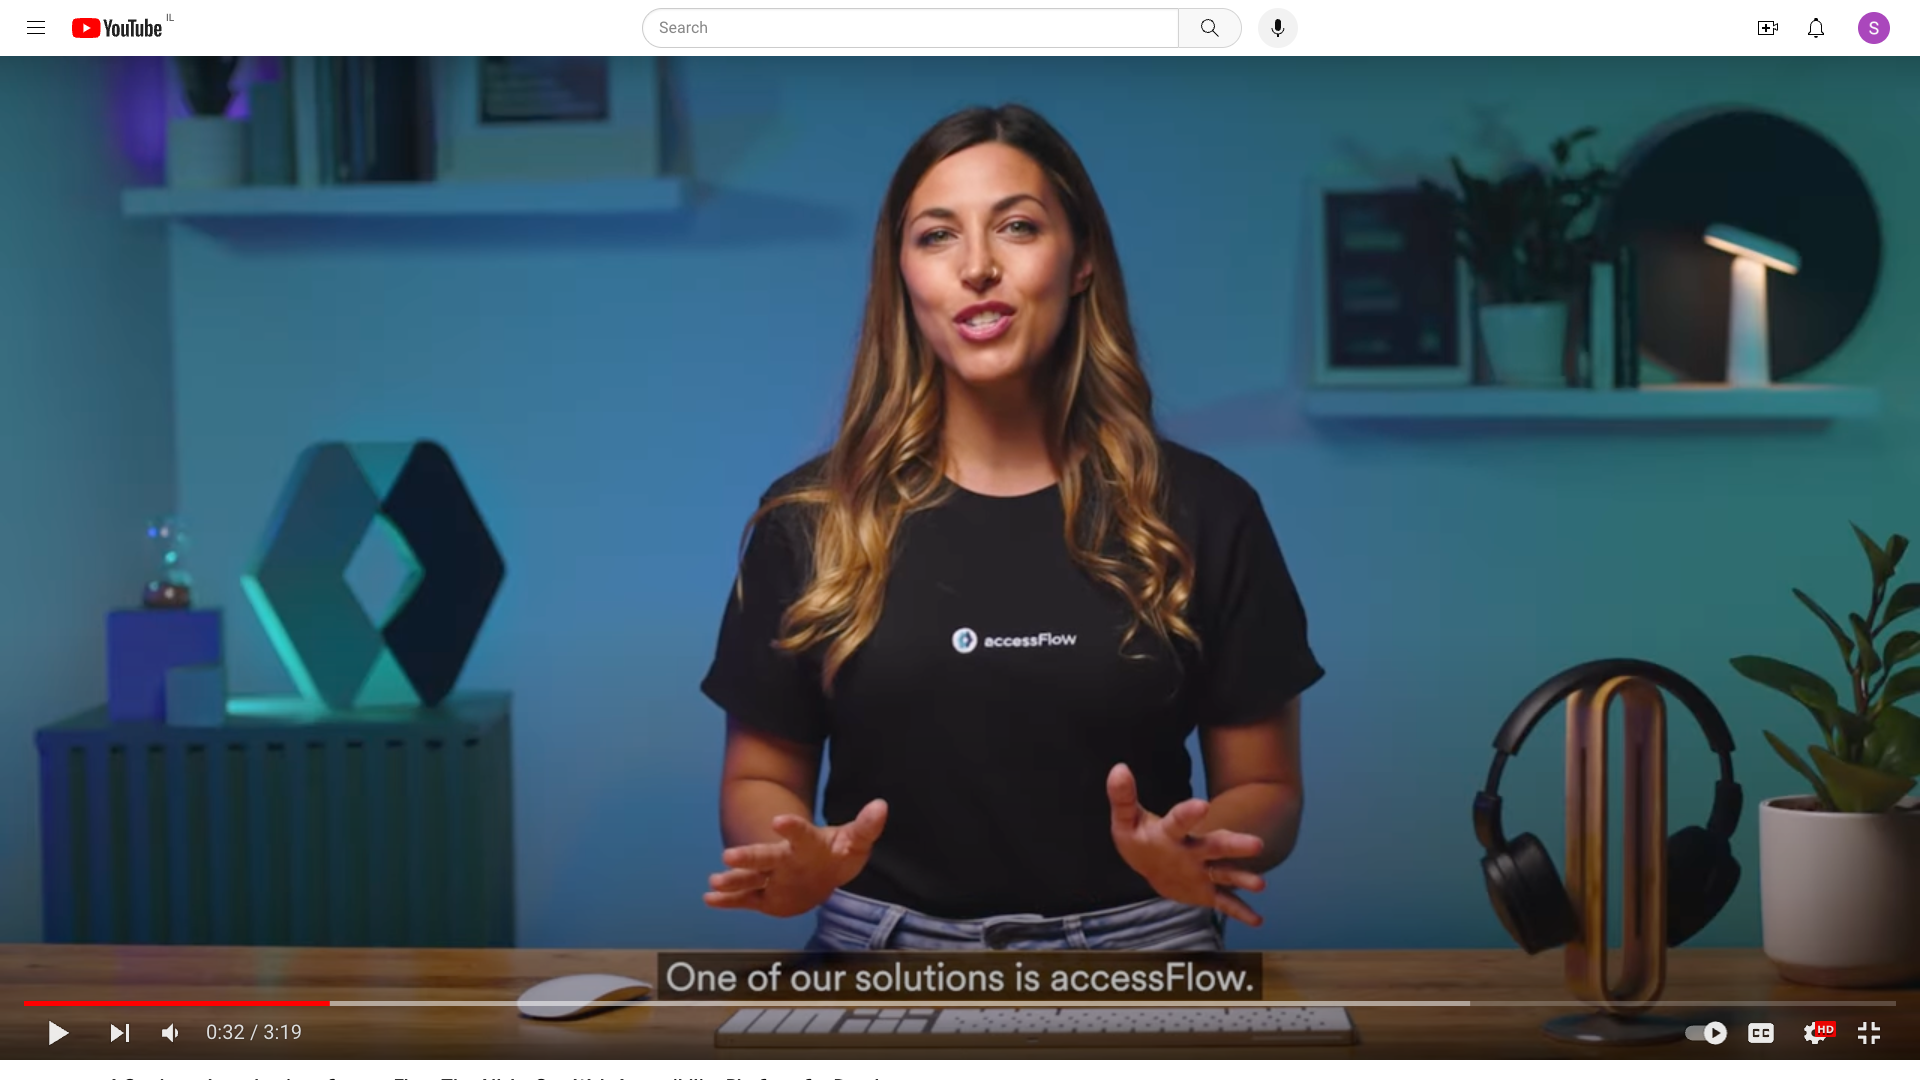 Video shot of a brunette girl in an accessiBe shirt with captions at the bottom of the screen